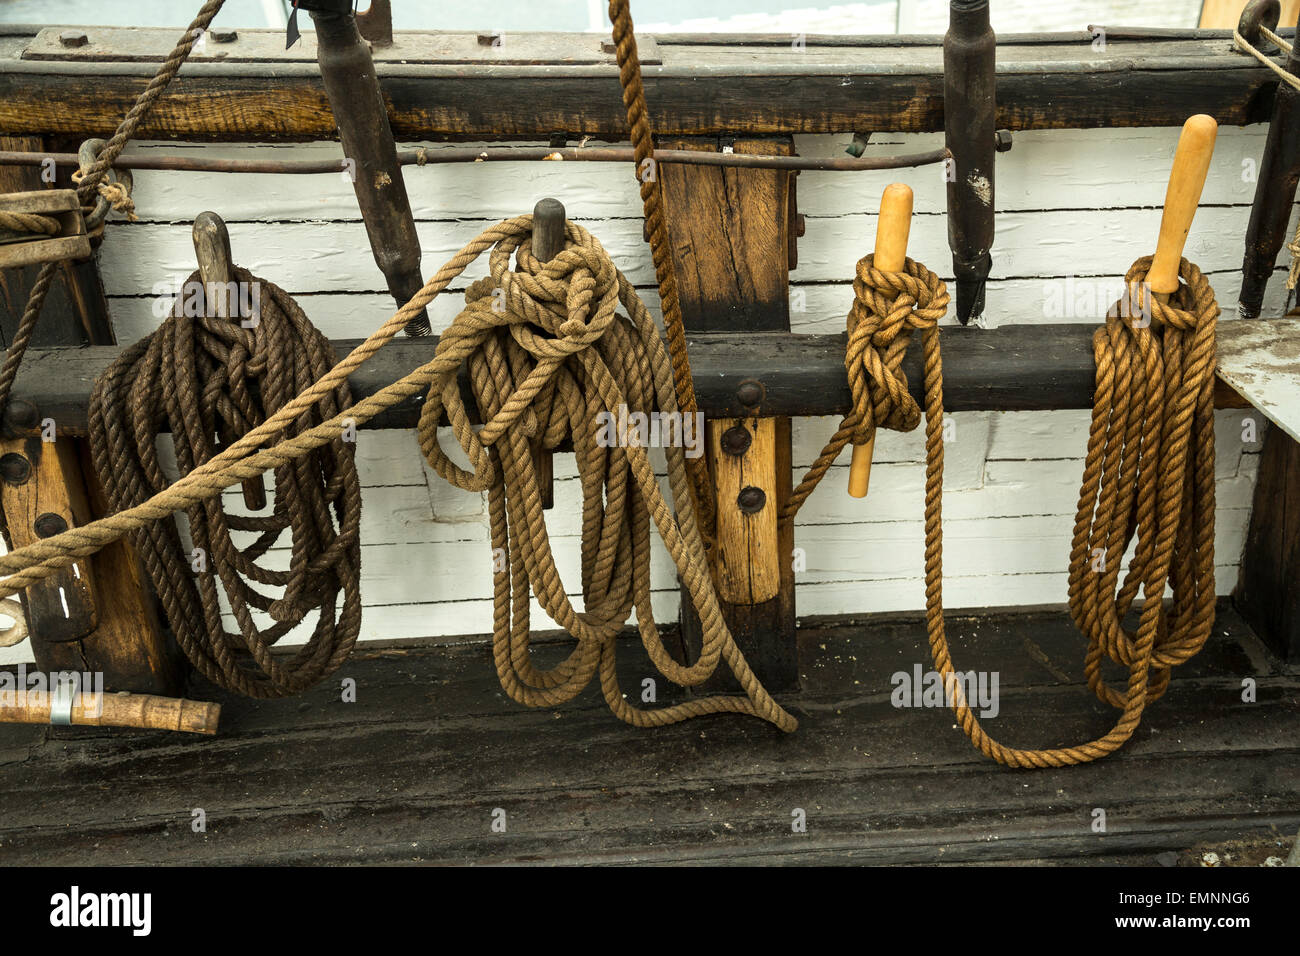 Rigging ropes tied on the side of a wooden sailing ship in Norway